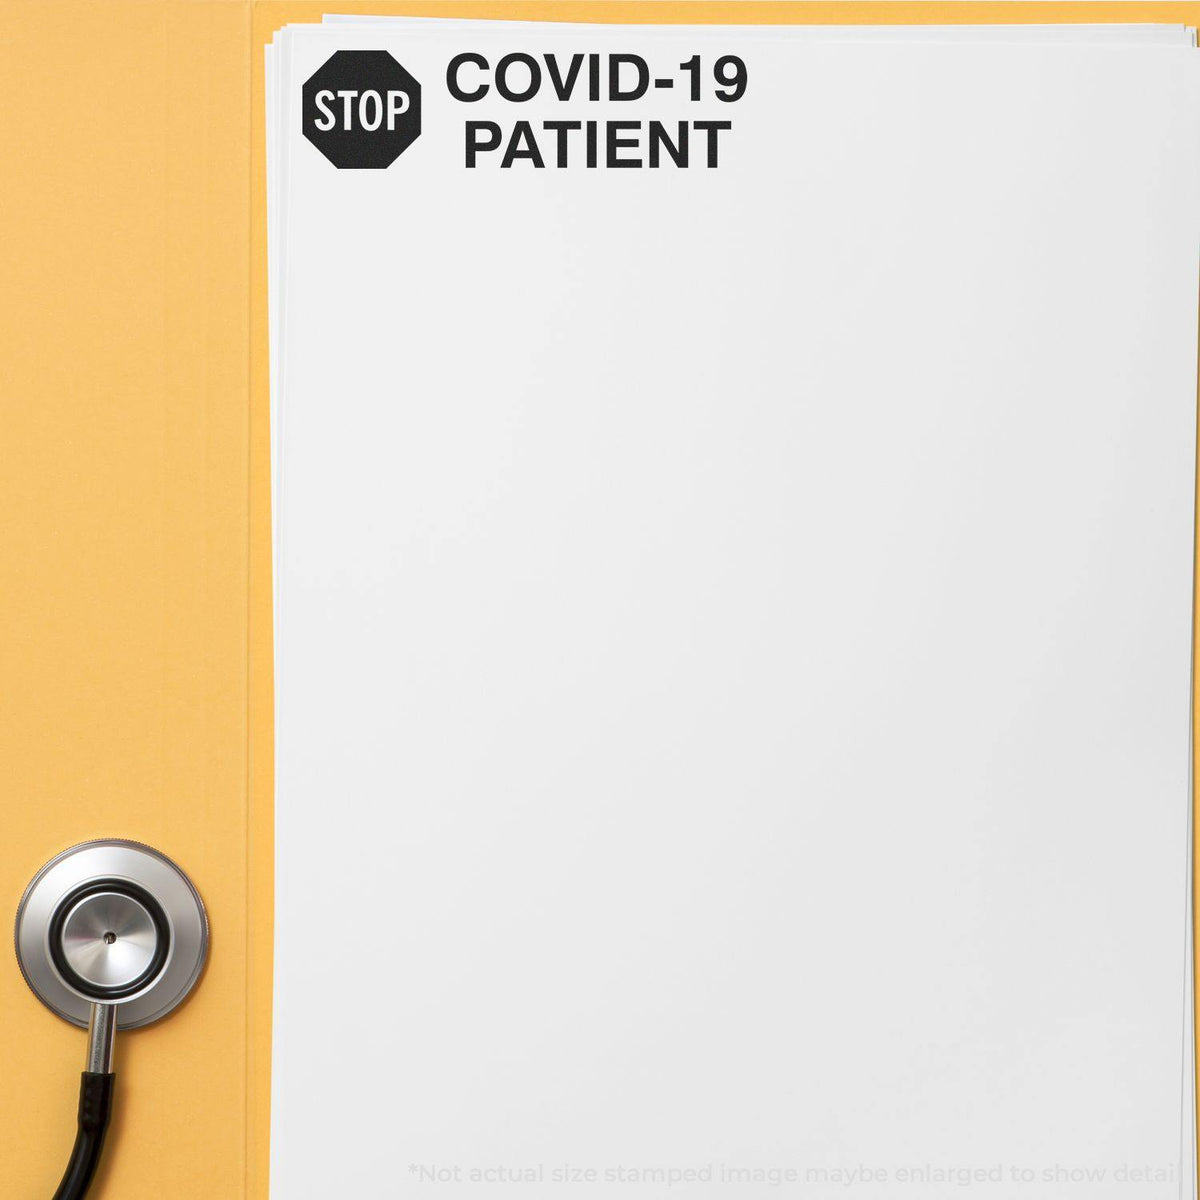 Large Stop Covid Patient Rubber Stamp - Engineer Seal Stamps - Brand_Acorn, Impression Size_Large, Stamp Type_Regular Stamp, Type of Use_Medical Office